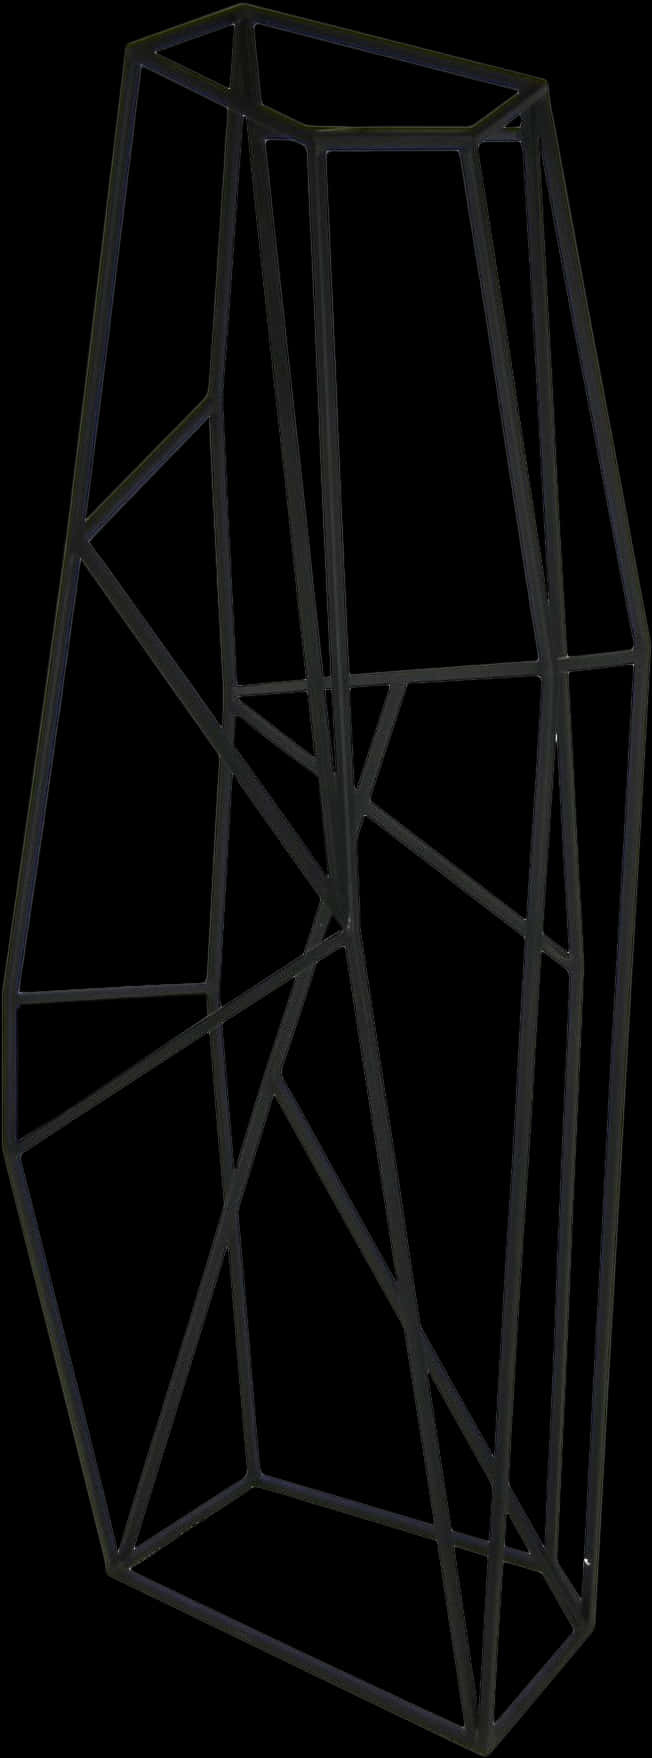 A Black Metal Structure With Black Background